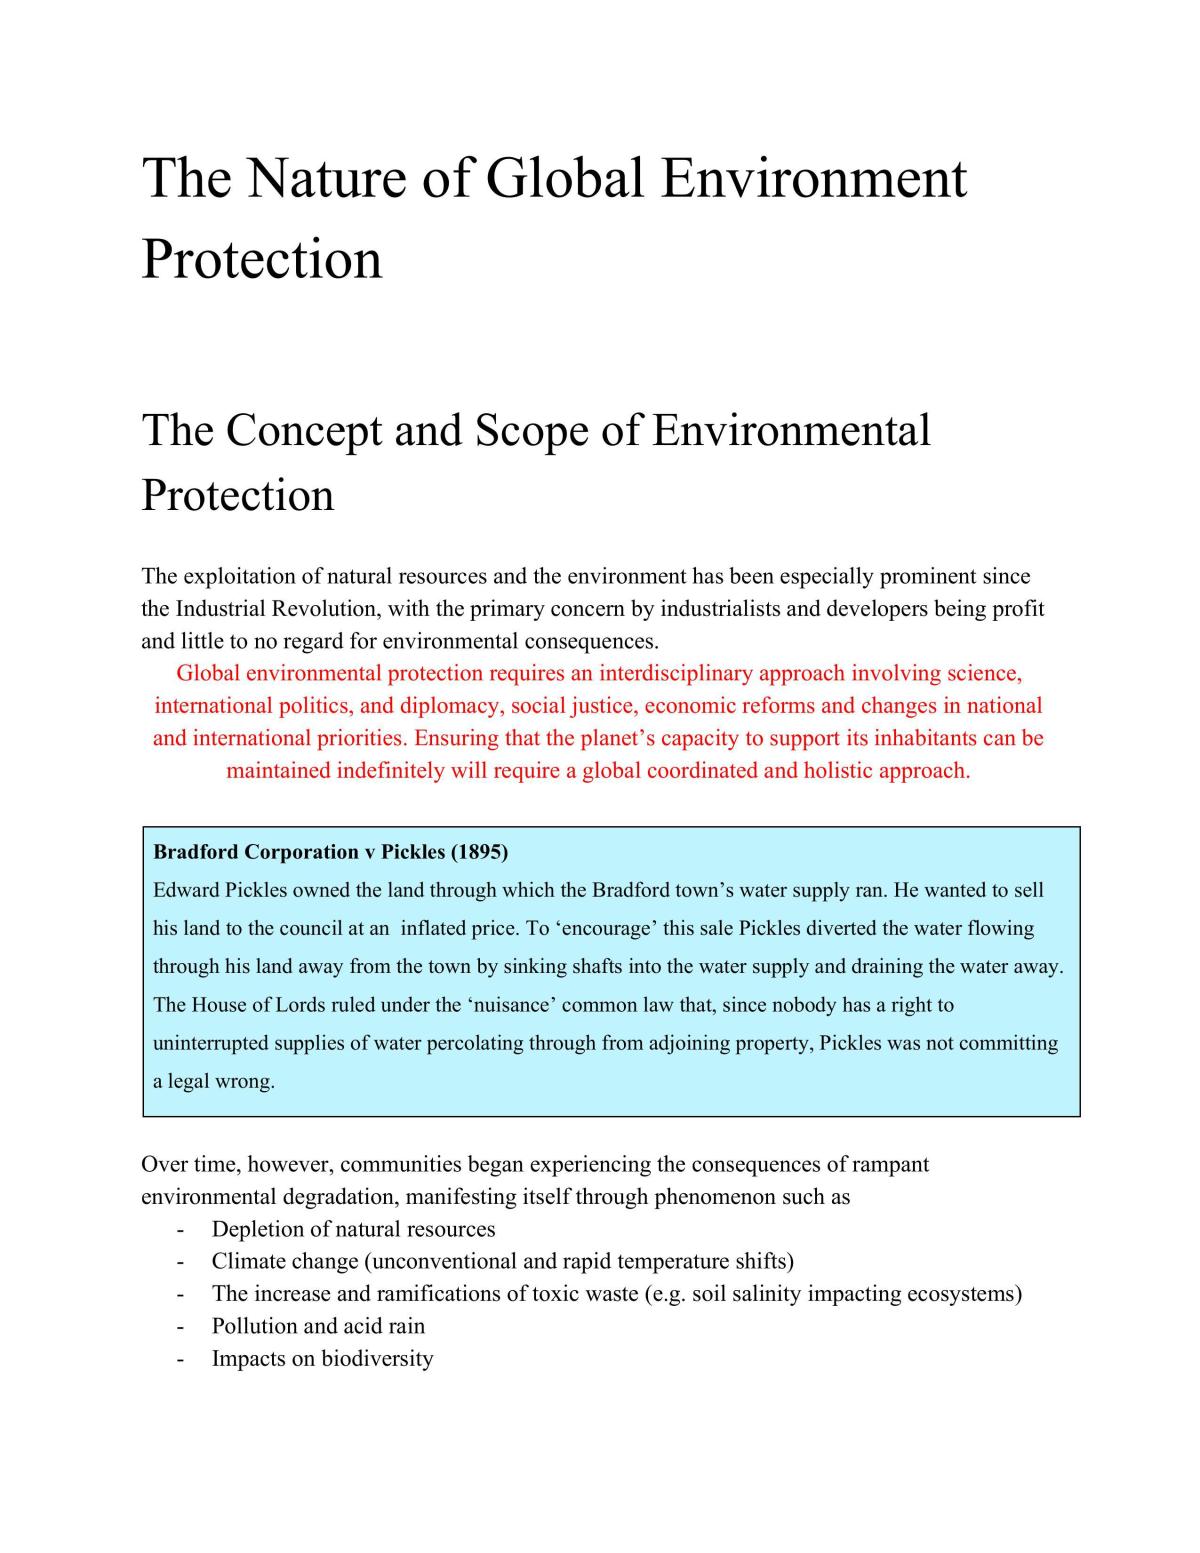 The Nature of Global Environment Protection - Page 1